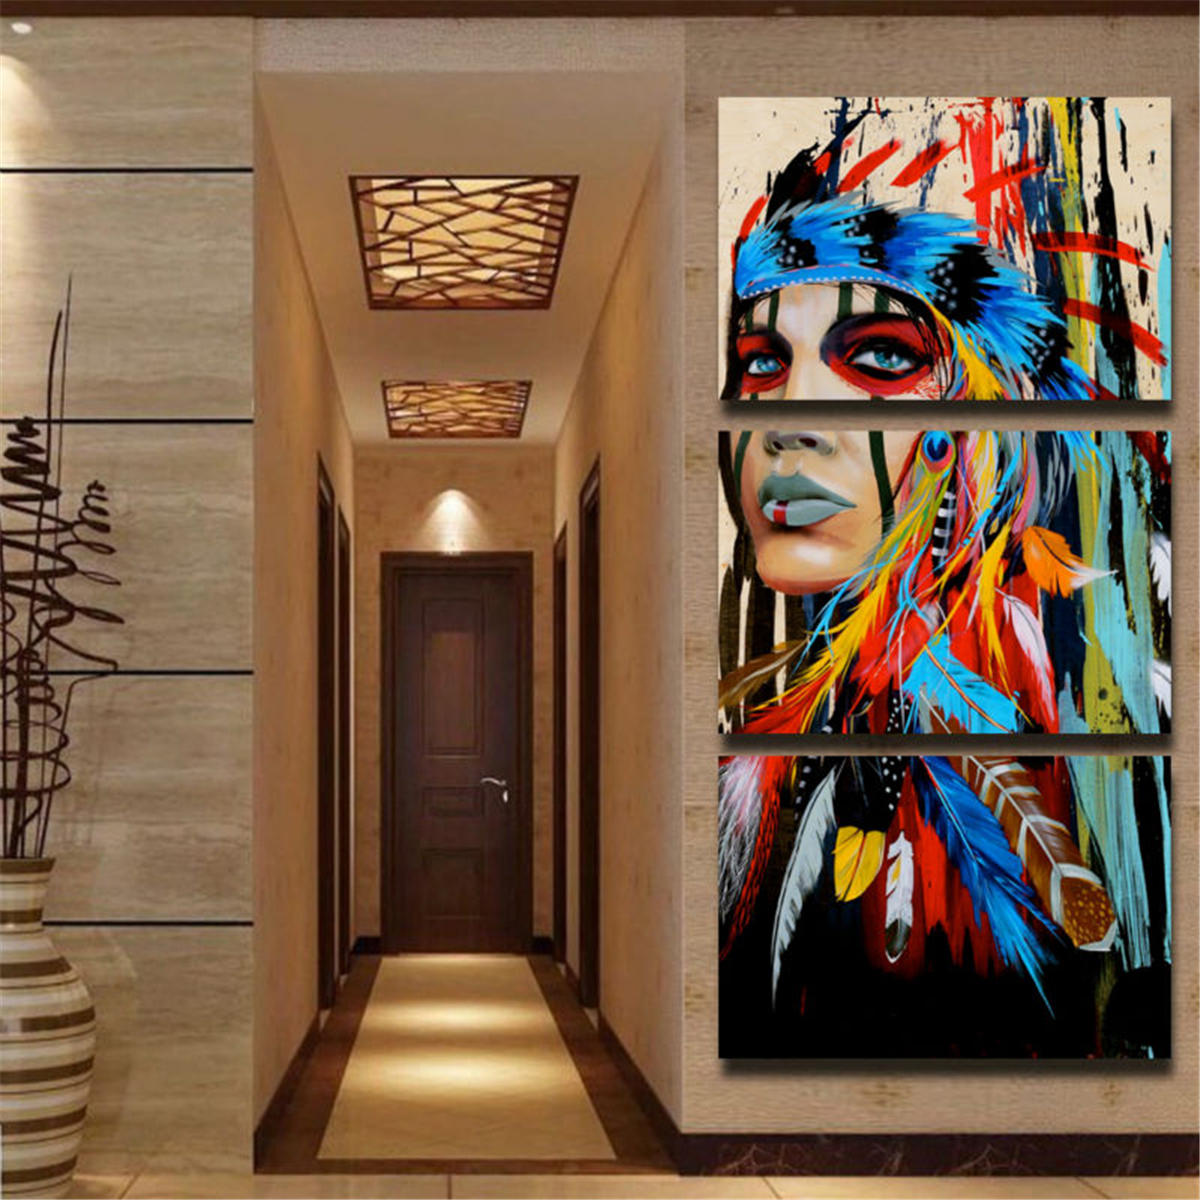 

3Pcs Set Indian Woman Canvas Paintings Print Picture Modern Art Wall Home